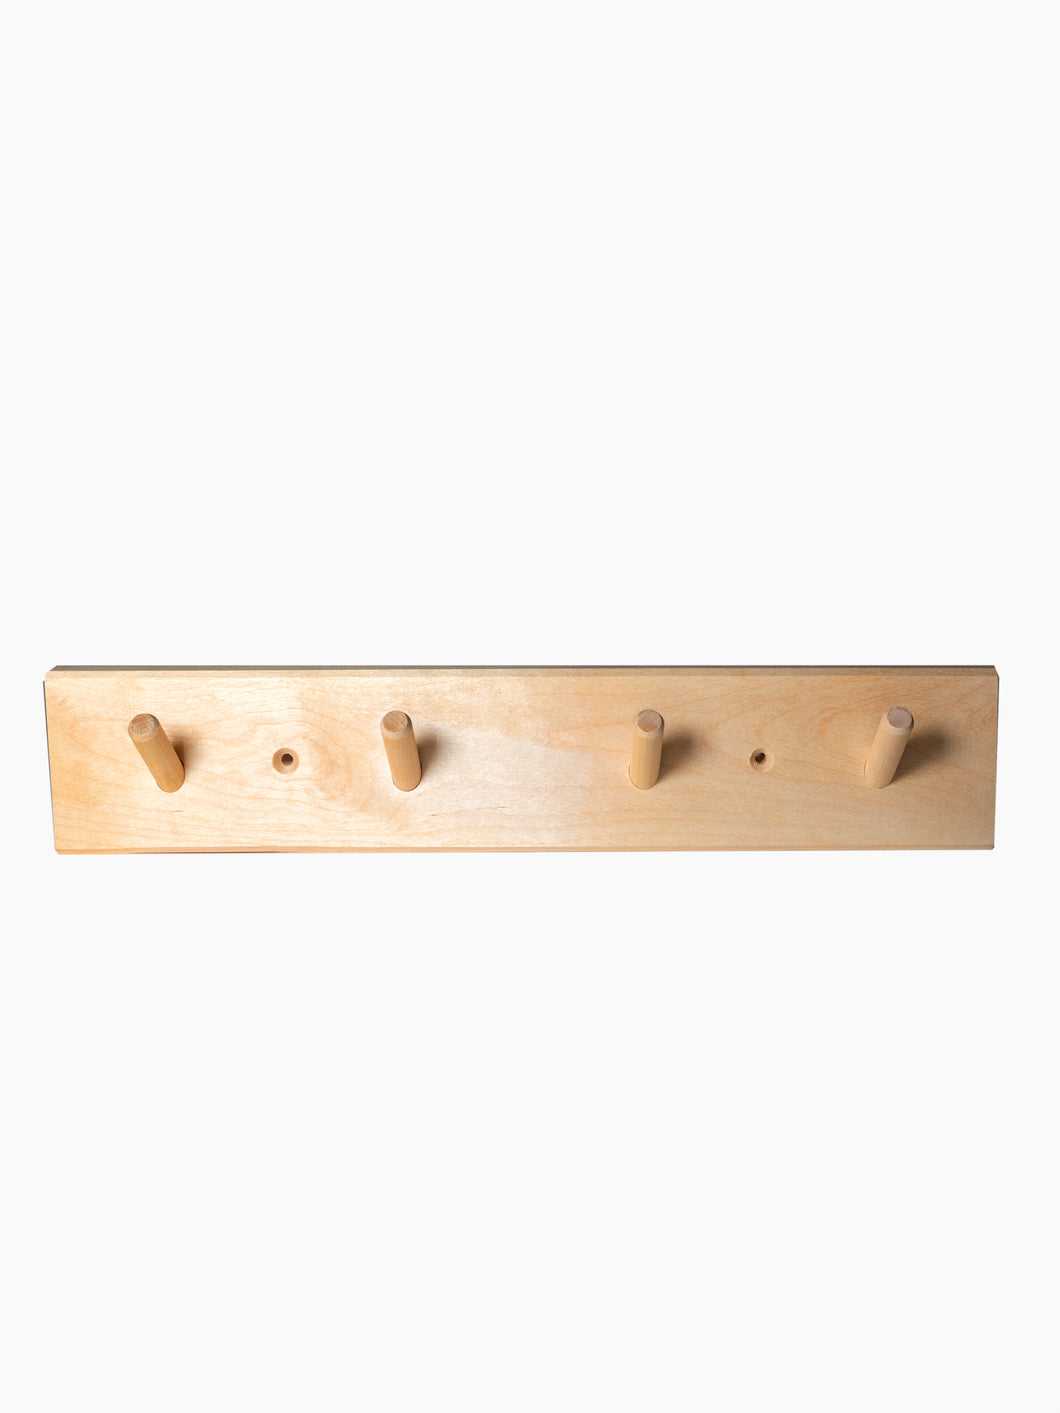 Wooden Rack with 4 Hooks